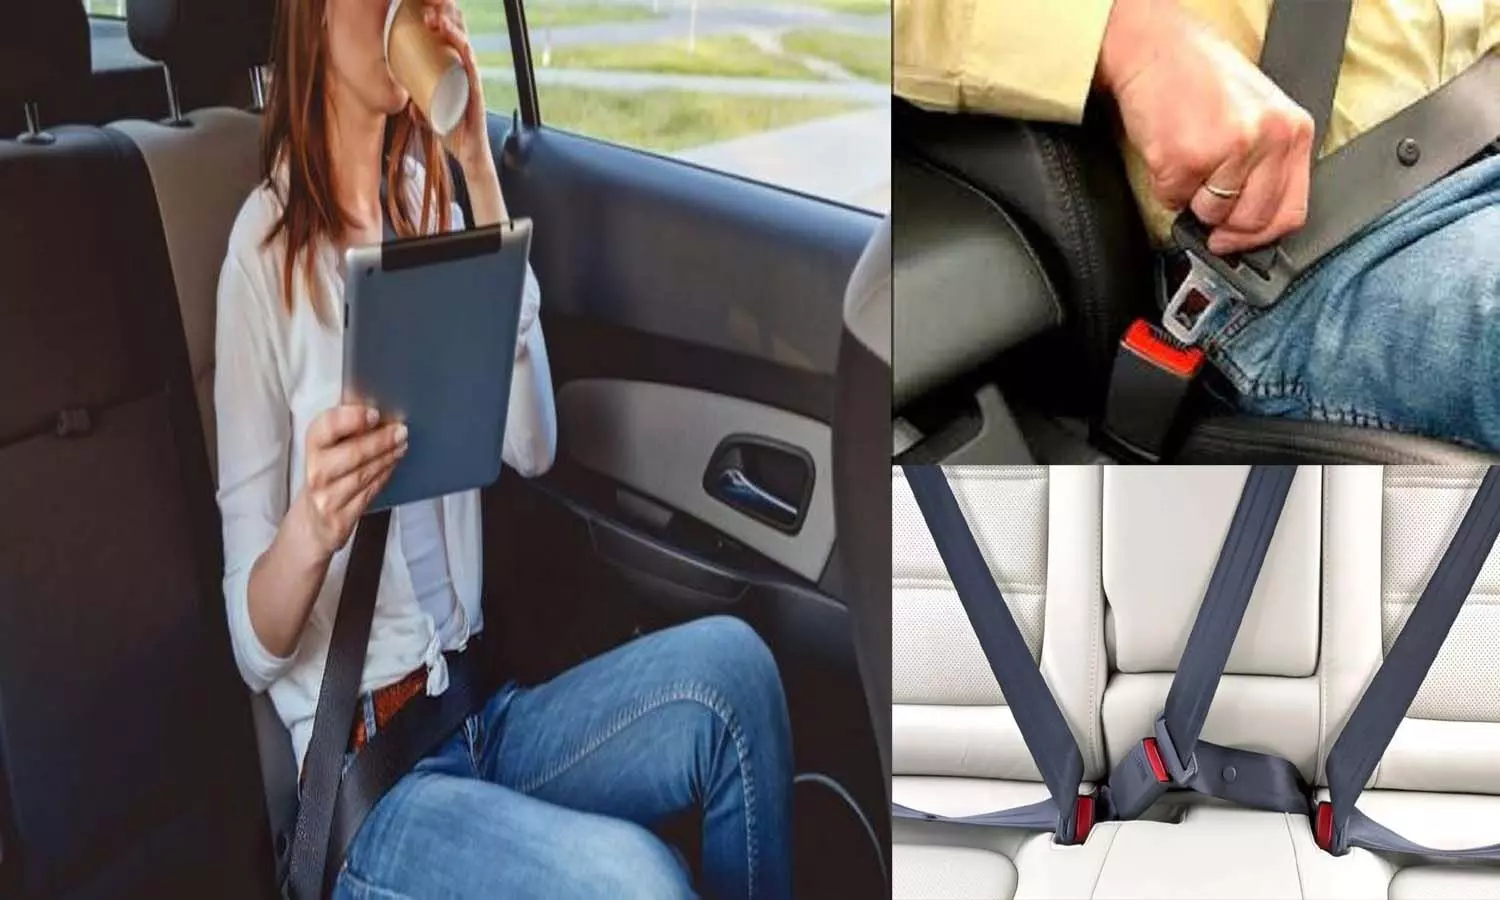 It is mandatory for the people with the back seat in the car to wear a seat belt, otherwise a fine of Rs 1,000